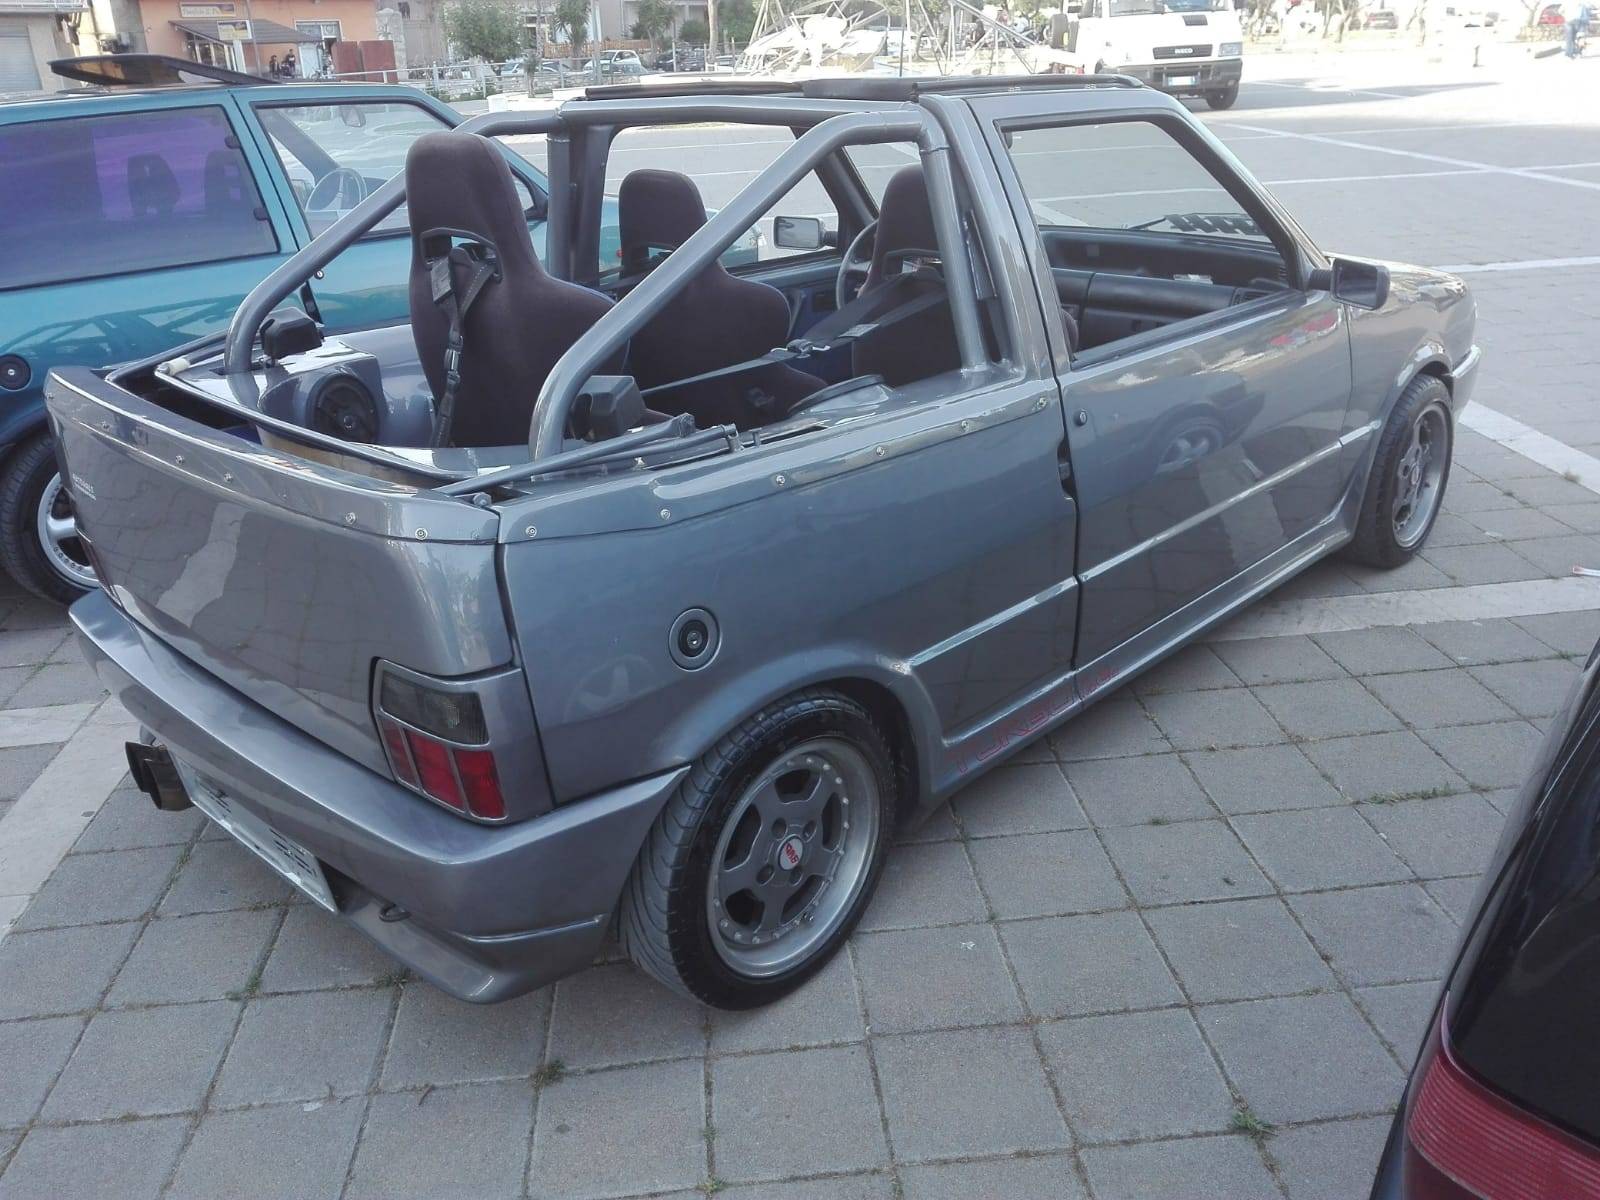 For Sale: FIAT Uno Turbo i.e. (1990) offered for €18,000